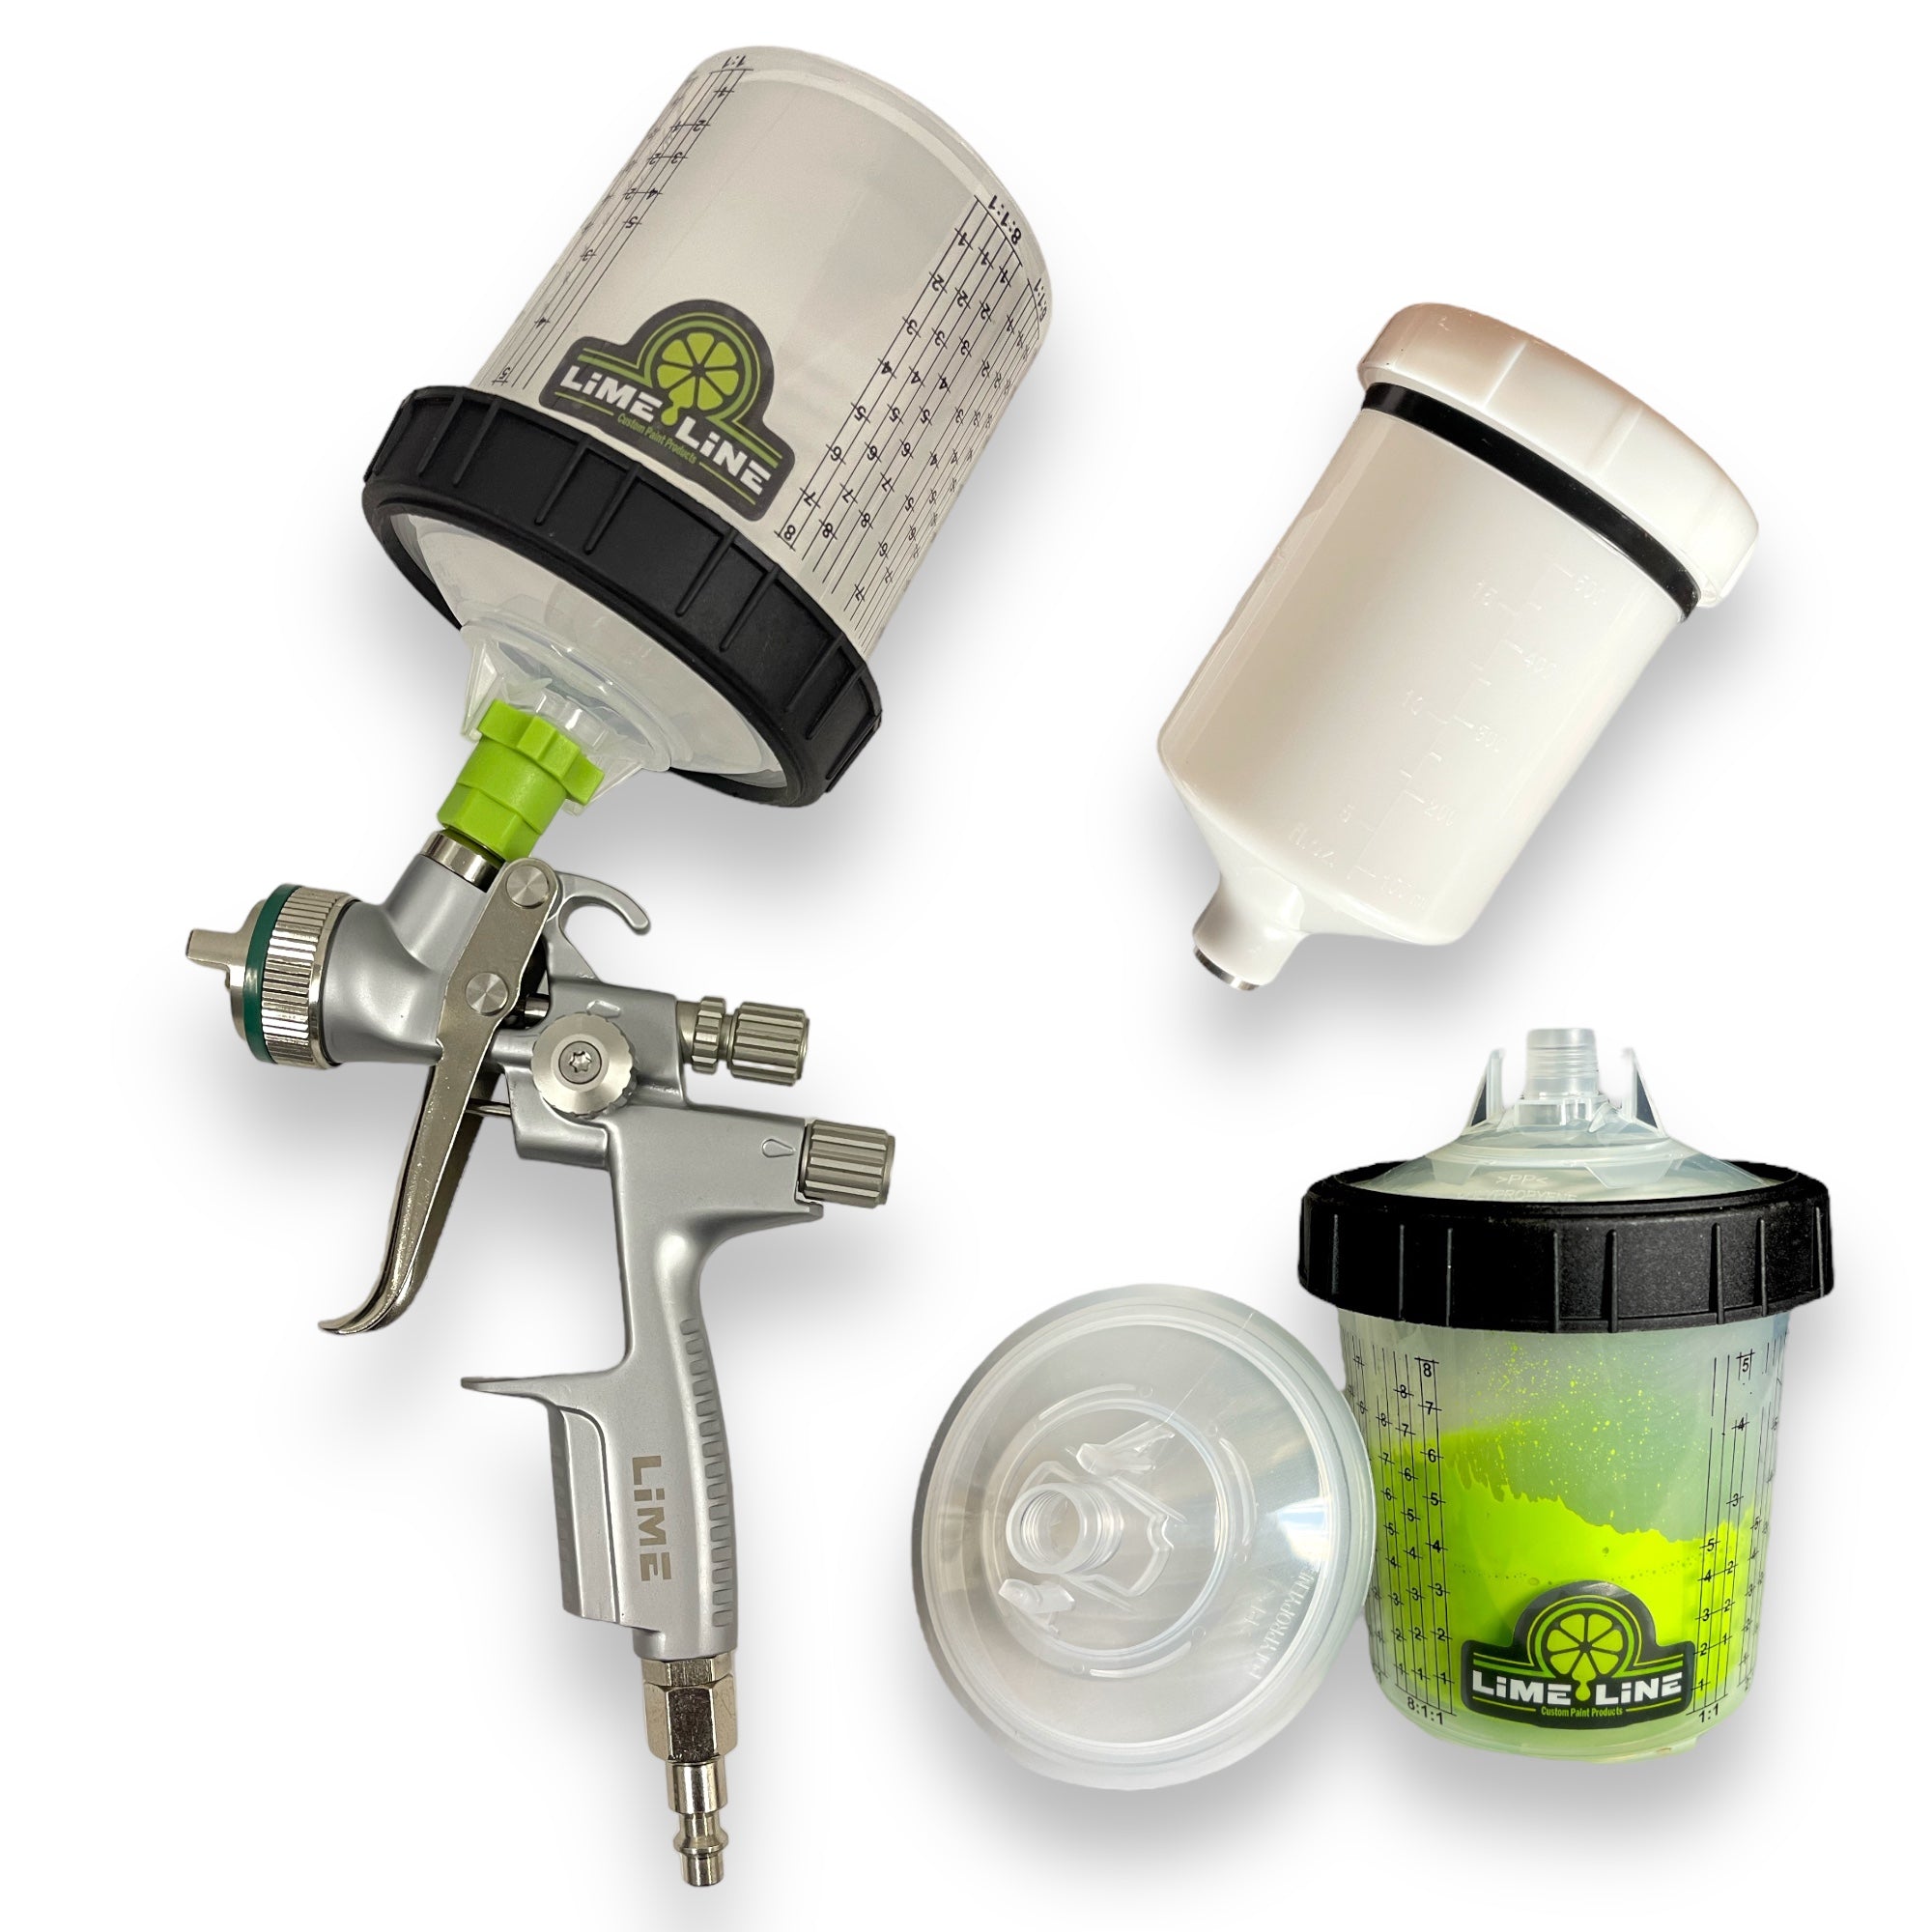 20 oz LiME LiNERS Disposable Paint Spray Gun Cup Liners and Lid System